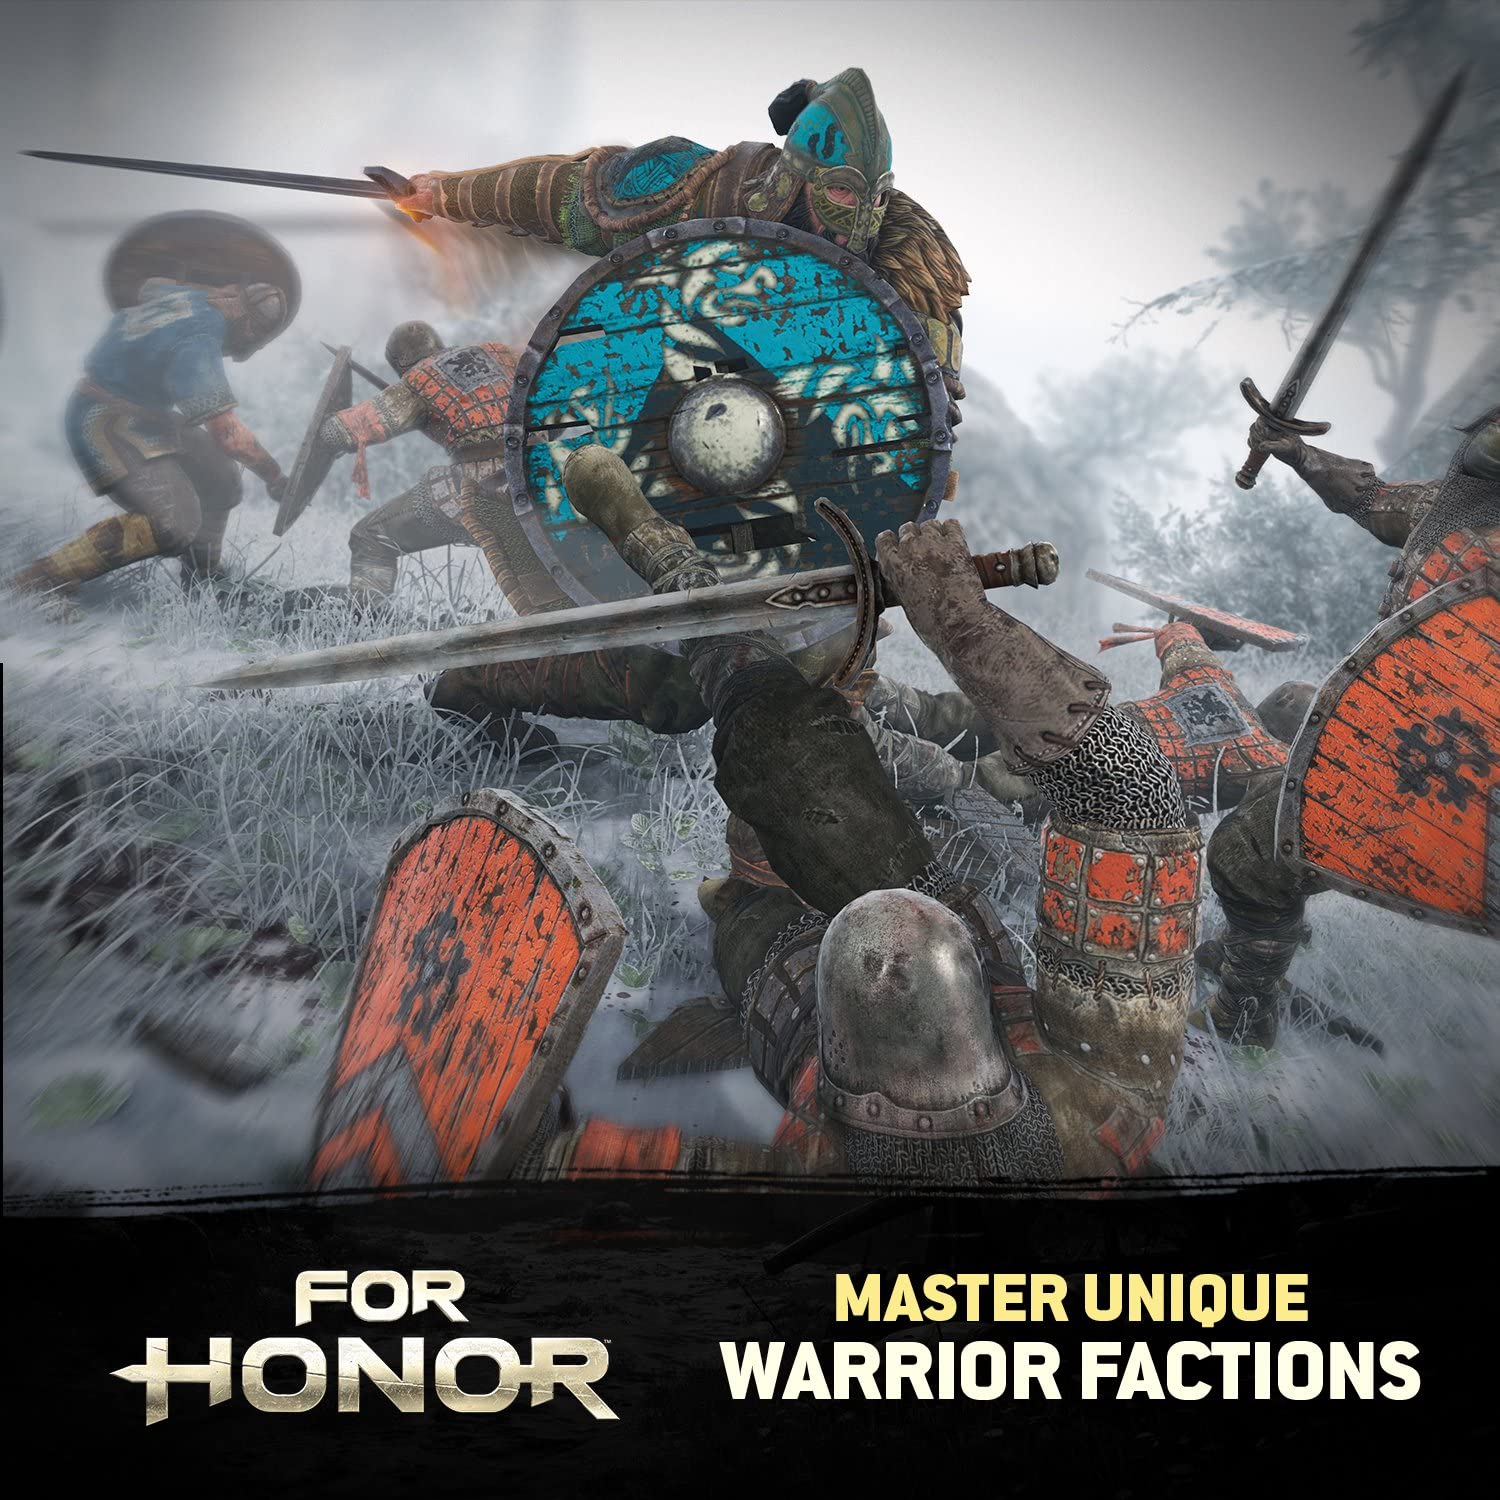 For Honor Deluxe Edition (PS4)